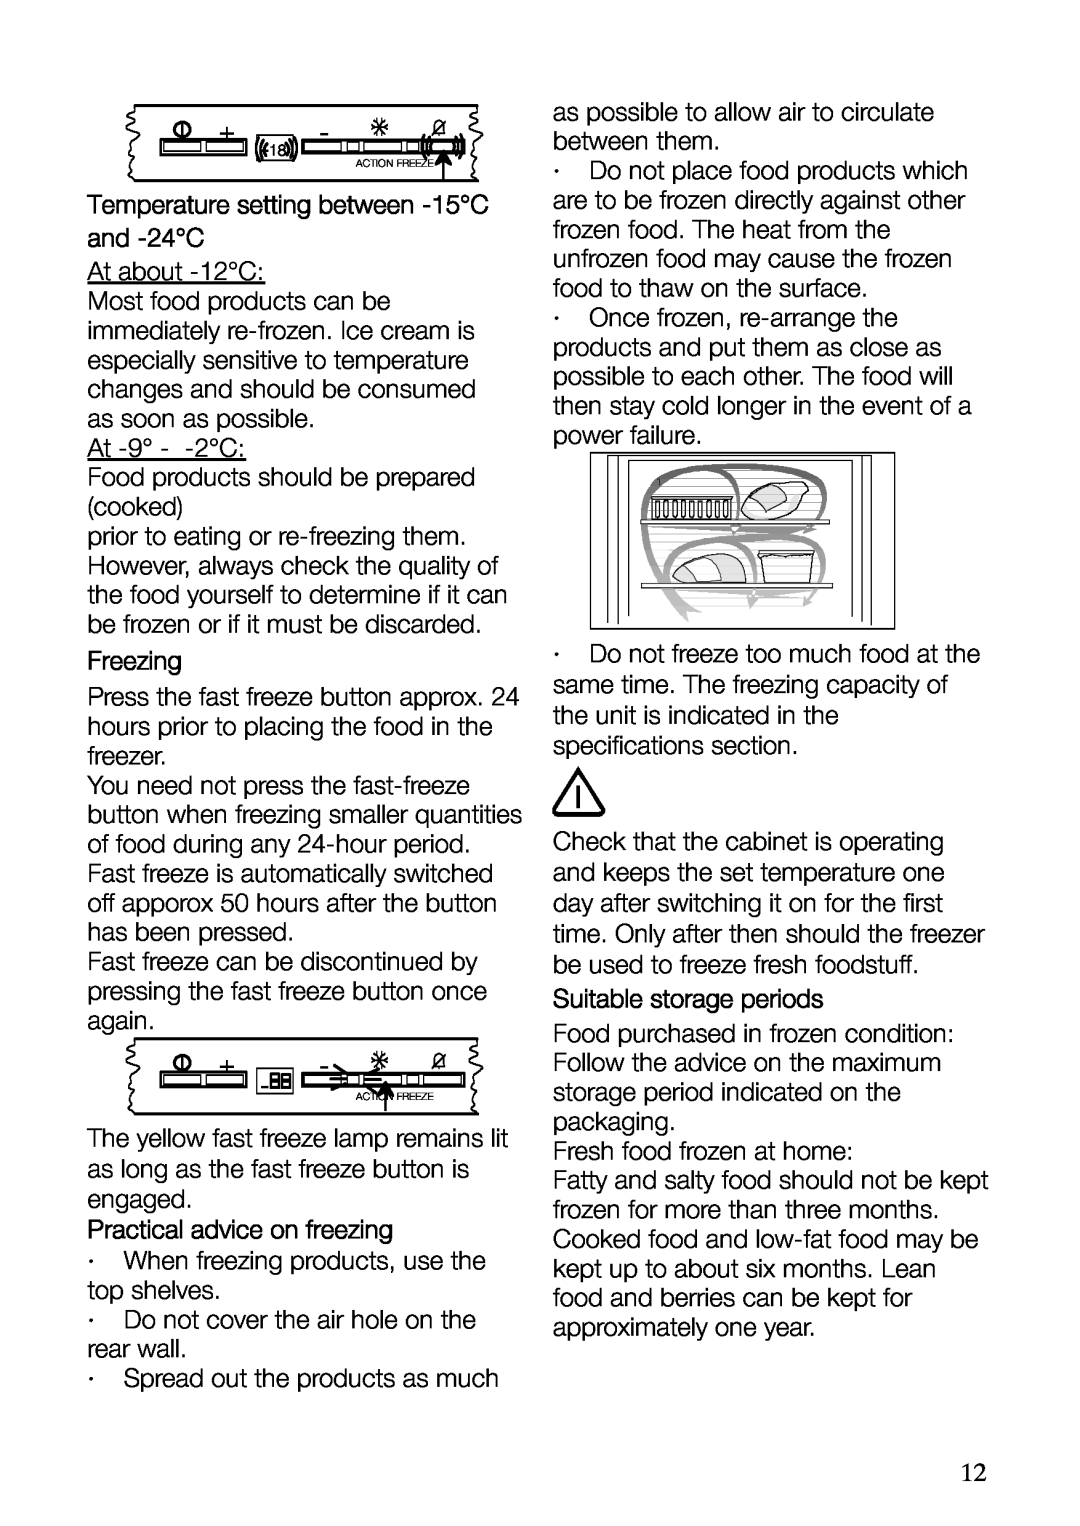 Electrolux ERF37800WX user manual Temperature setting between -15C and -24C, Freezing, Practical advice on freezing 